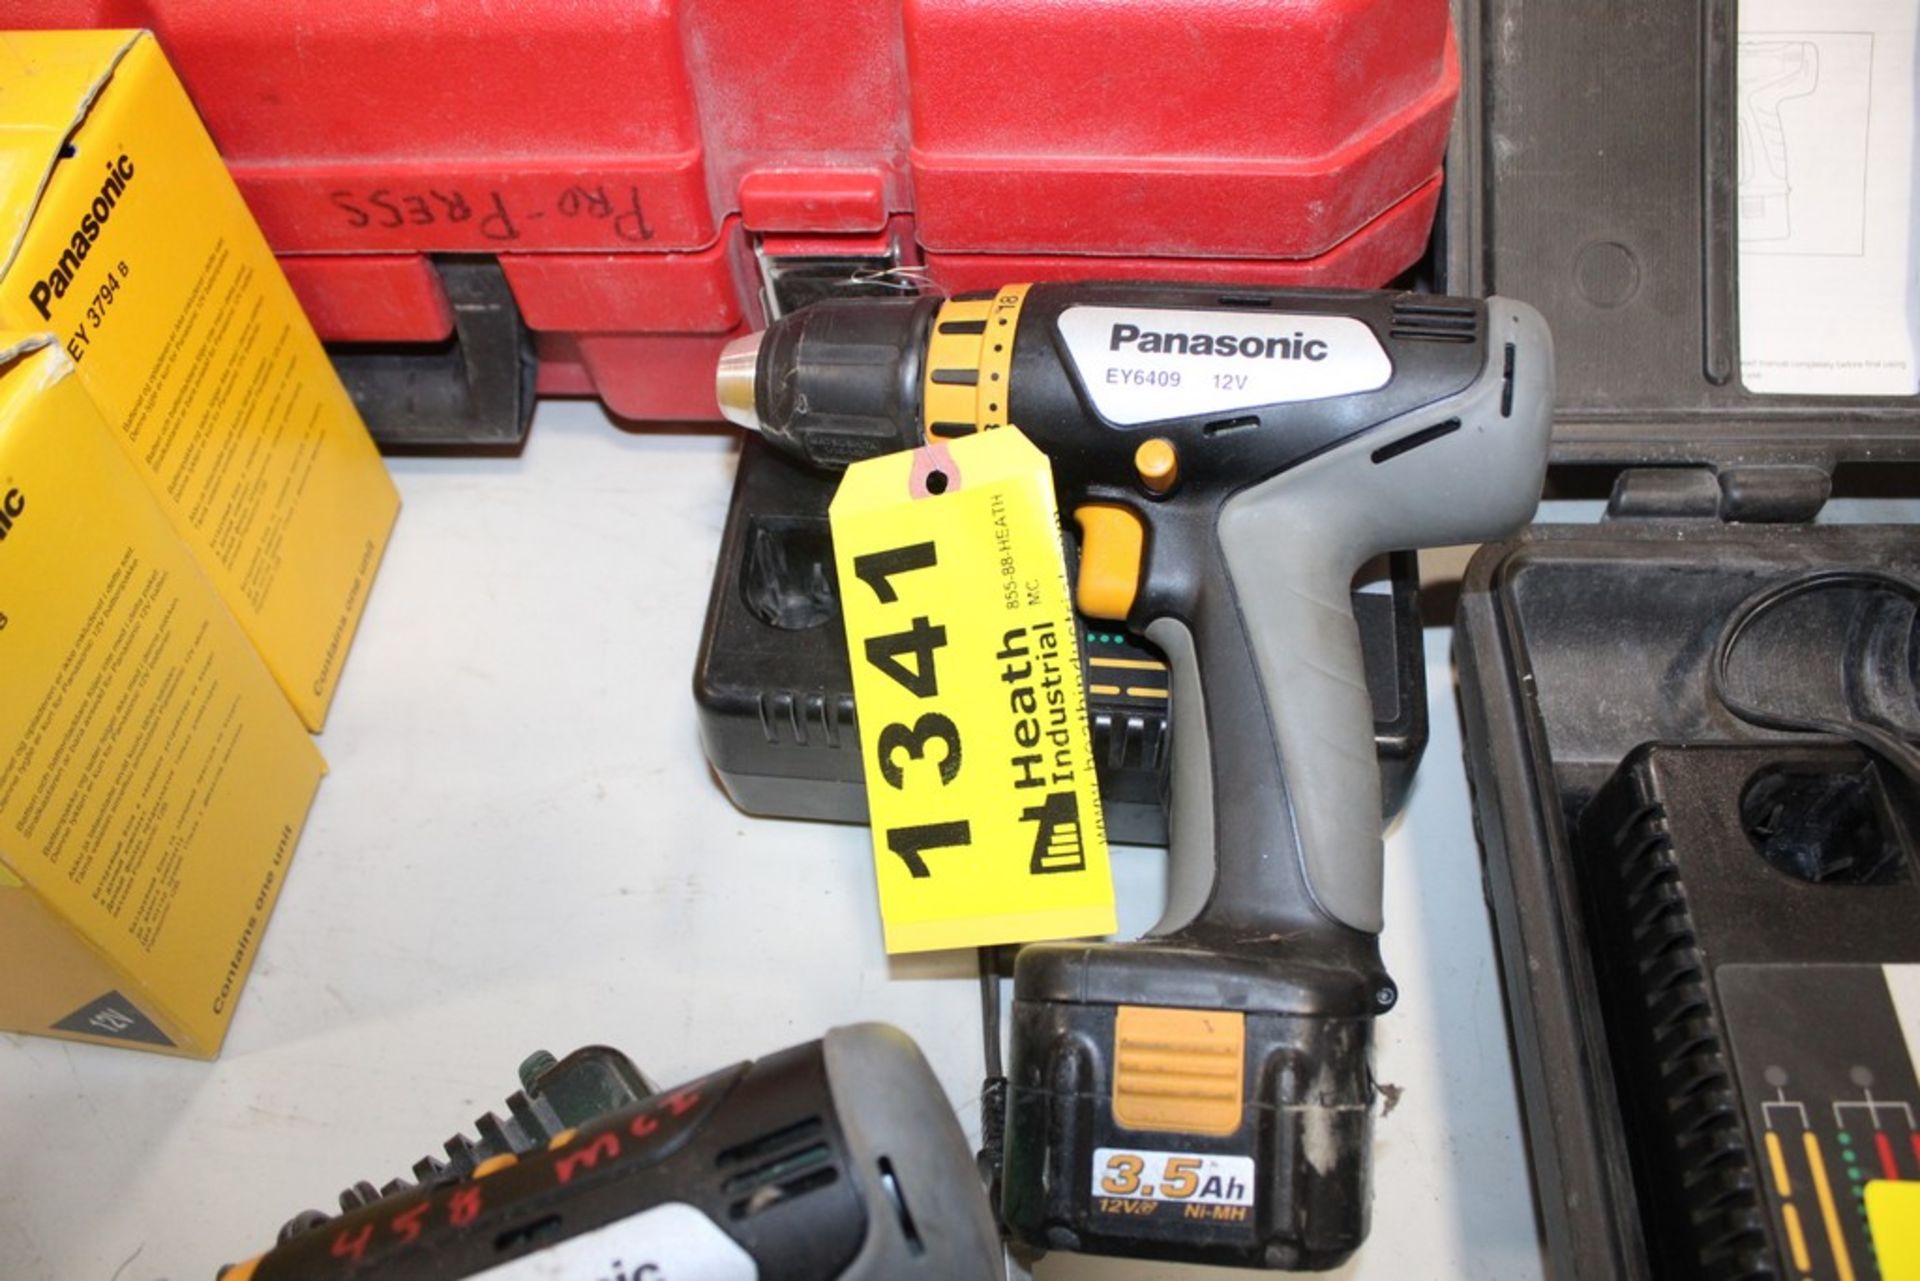 PANASONIC MODEL EY6409 12 CORDLESS DRILL WITH BATTERY AND CHARGER